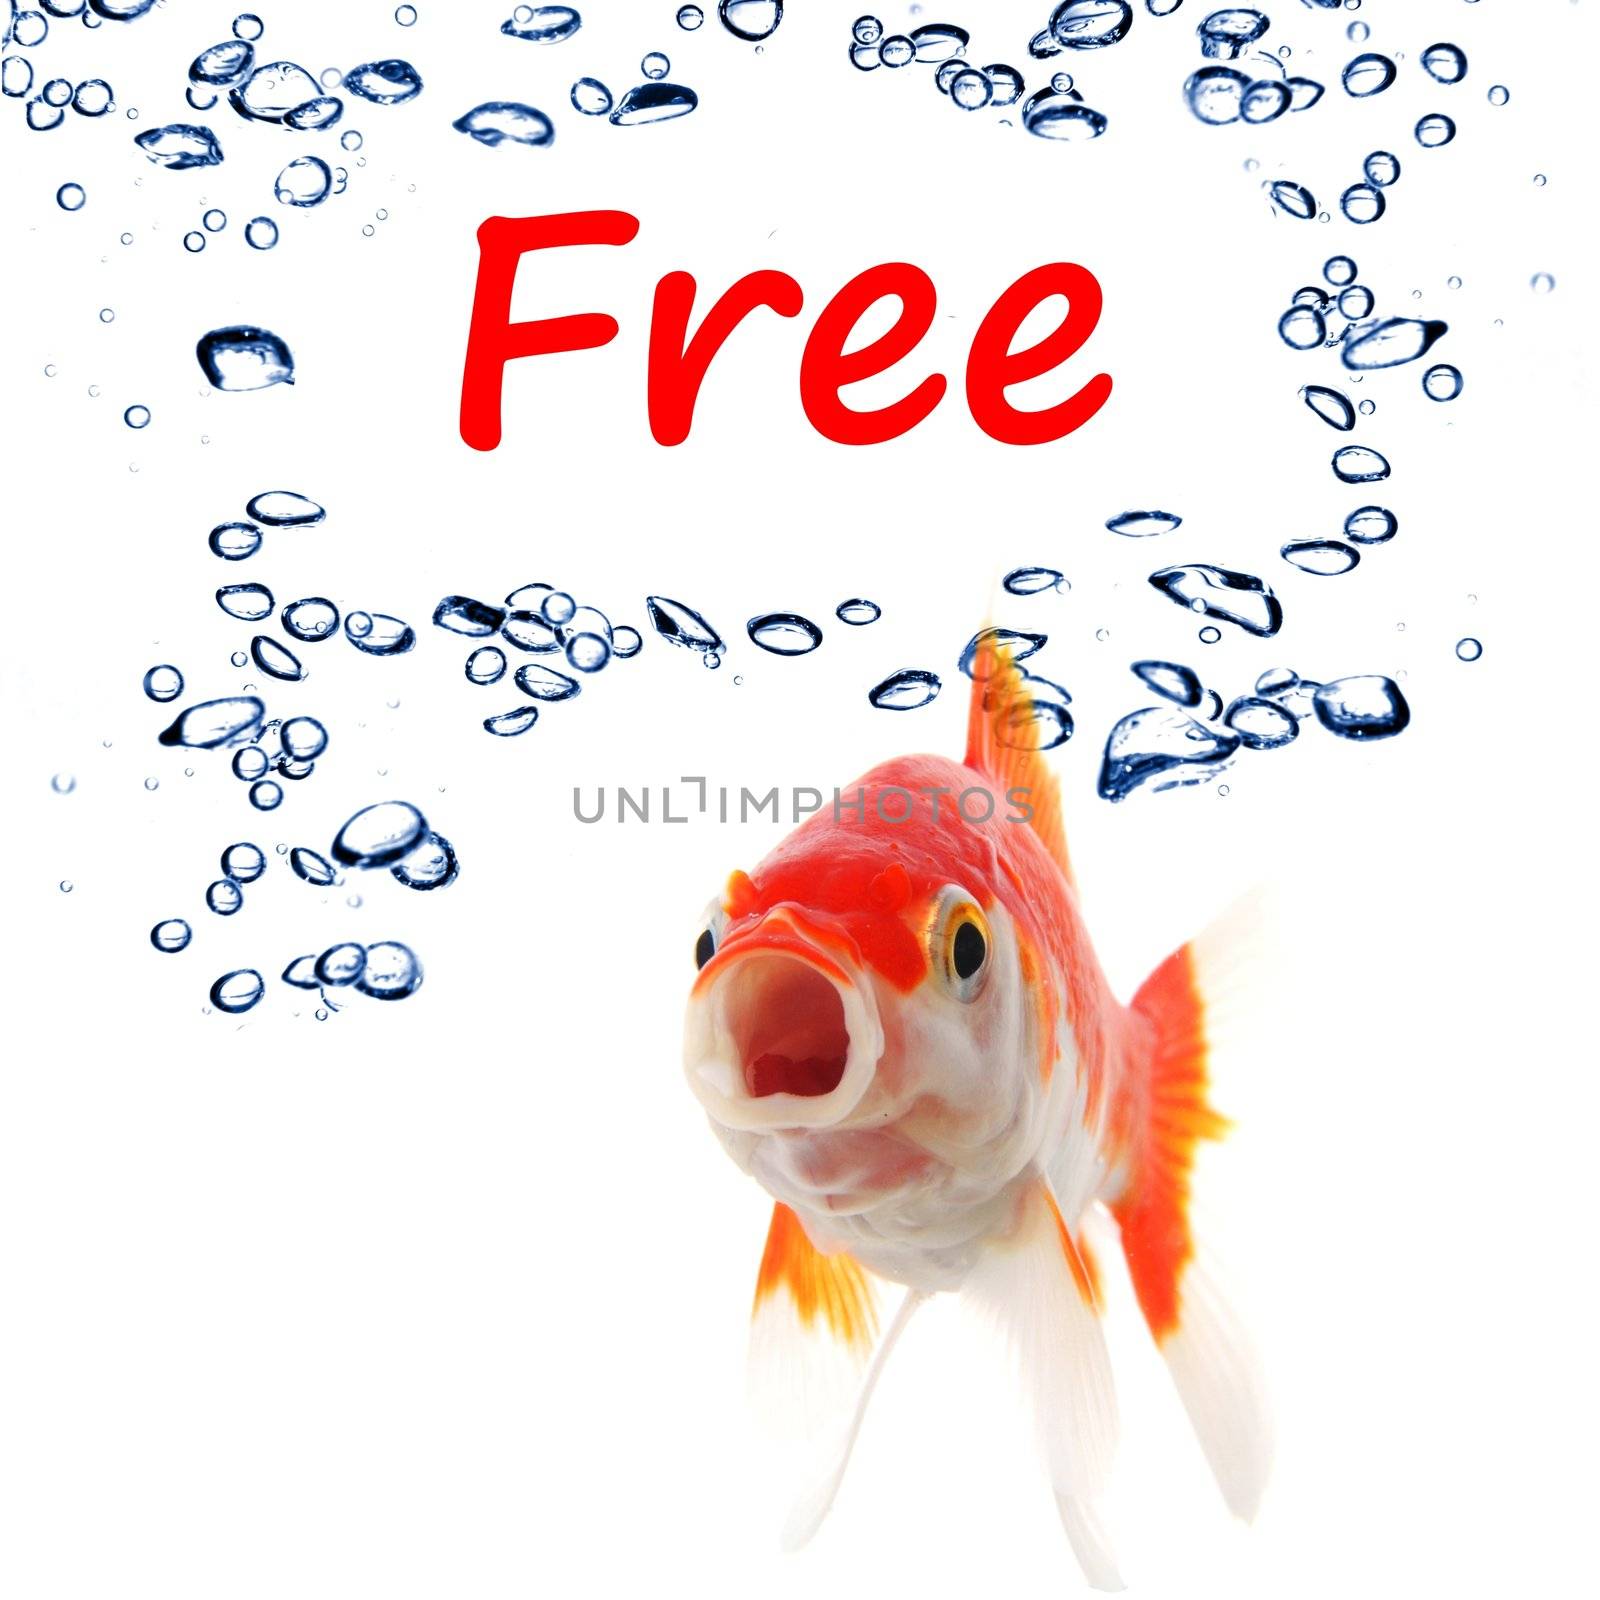 word free and goldfish showing sale or discount concept